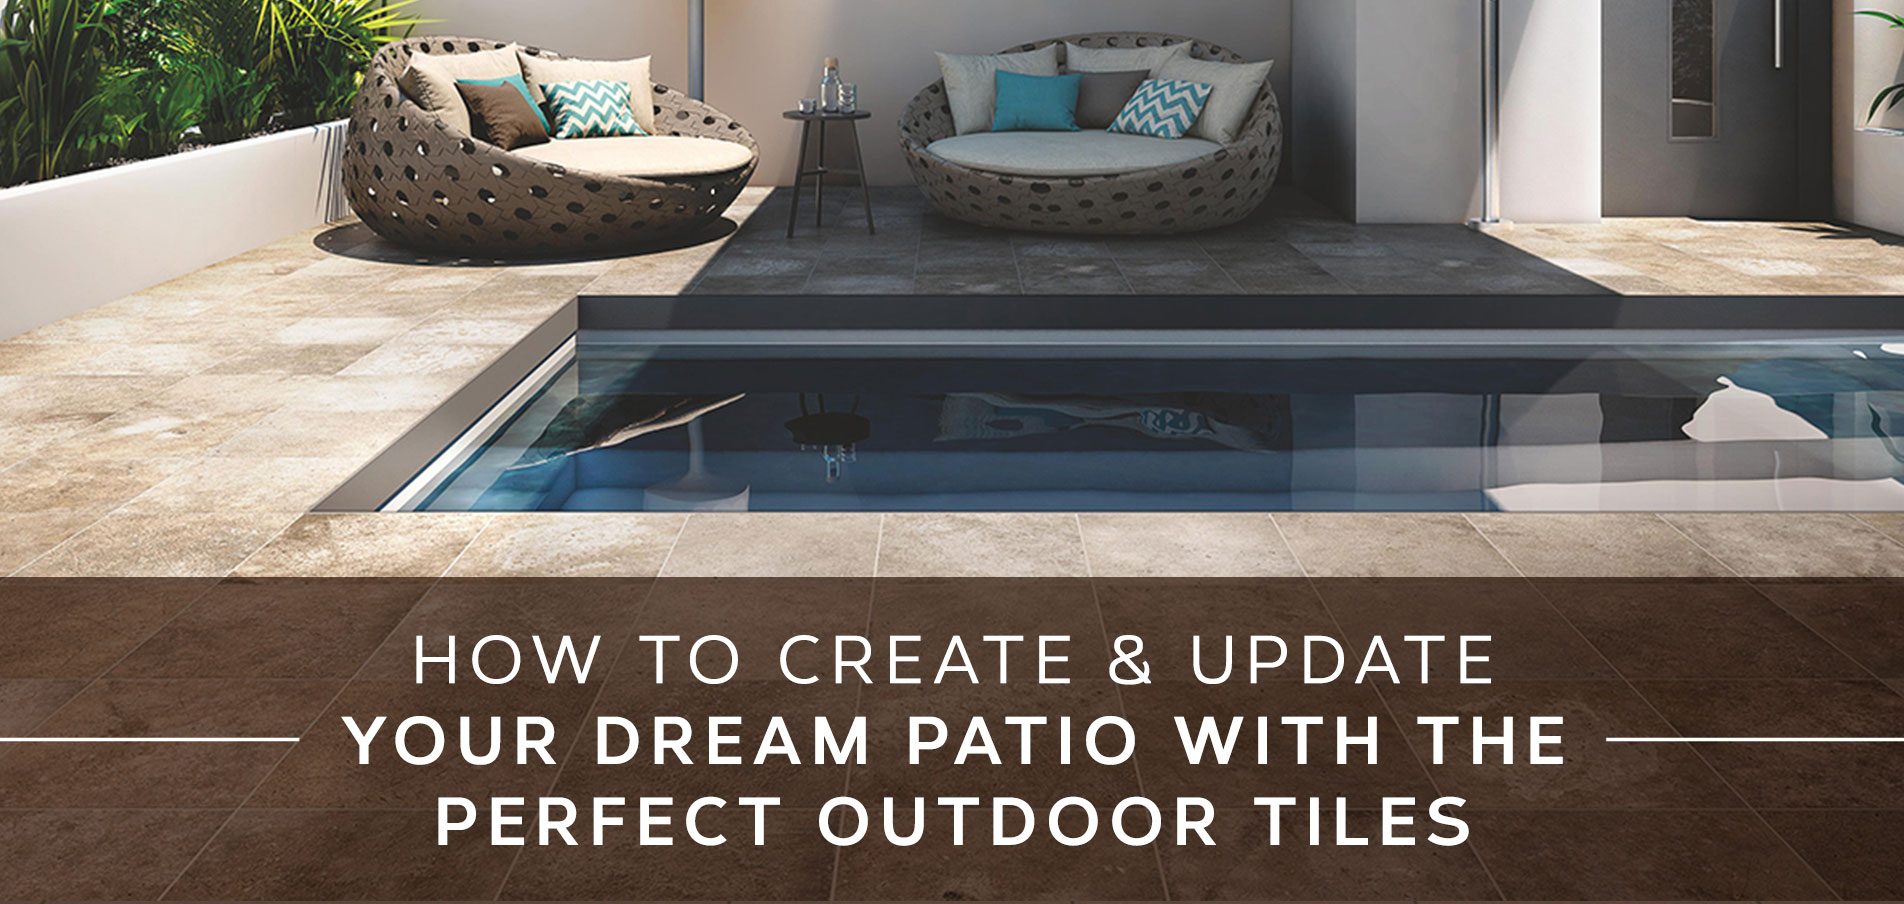 Create & Update Your Dream Patio with Perfect Outdoor Tiles